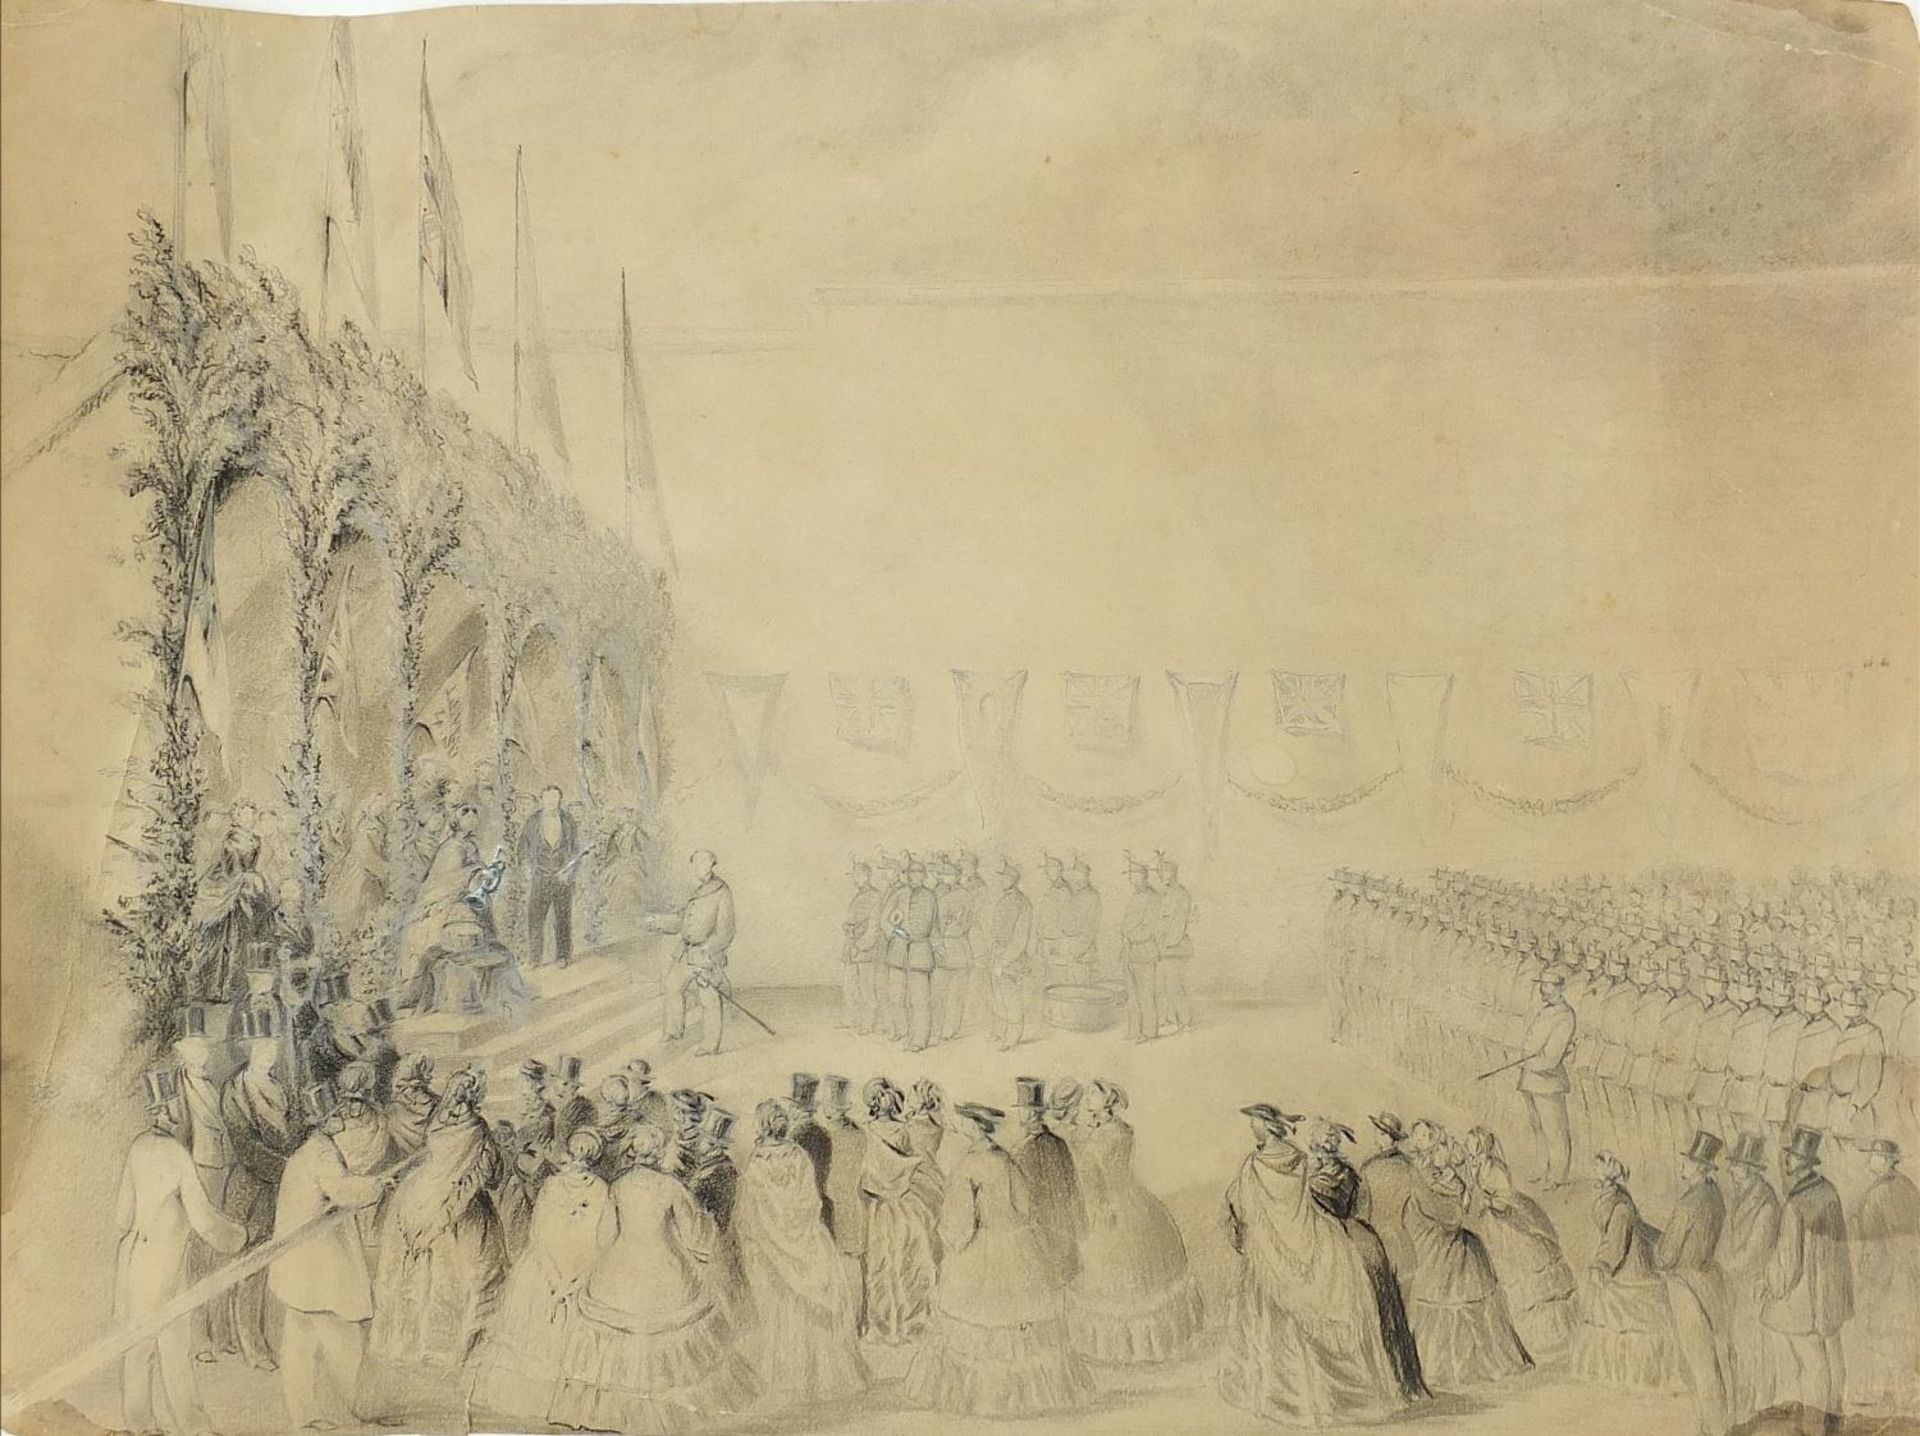 Ceremony with soldiers in military dress, 19th century heightened chalk and pencil on paper,